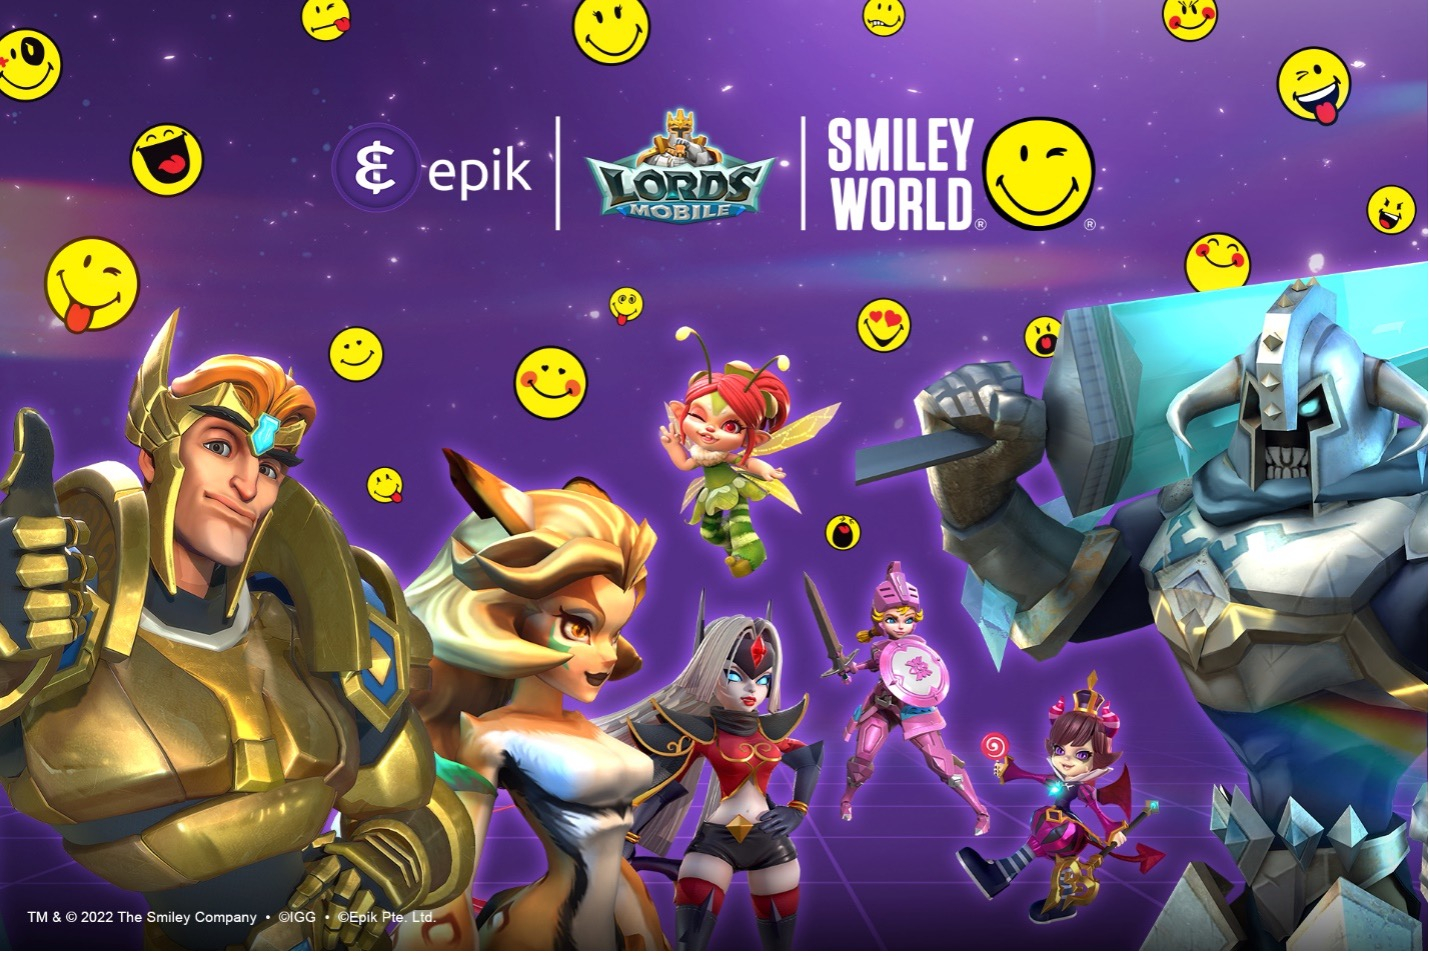 SmileyWorld, Epik, and IGG Games Launch a Kingdom Smiles Collaboration in Lords  Mobile, Complete With NFT Collectibles